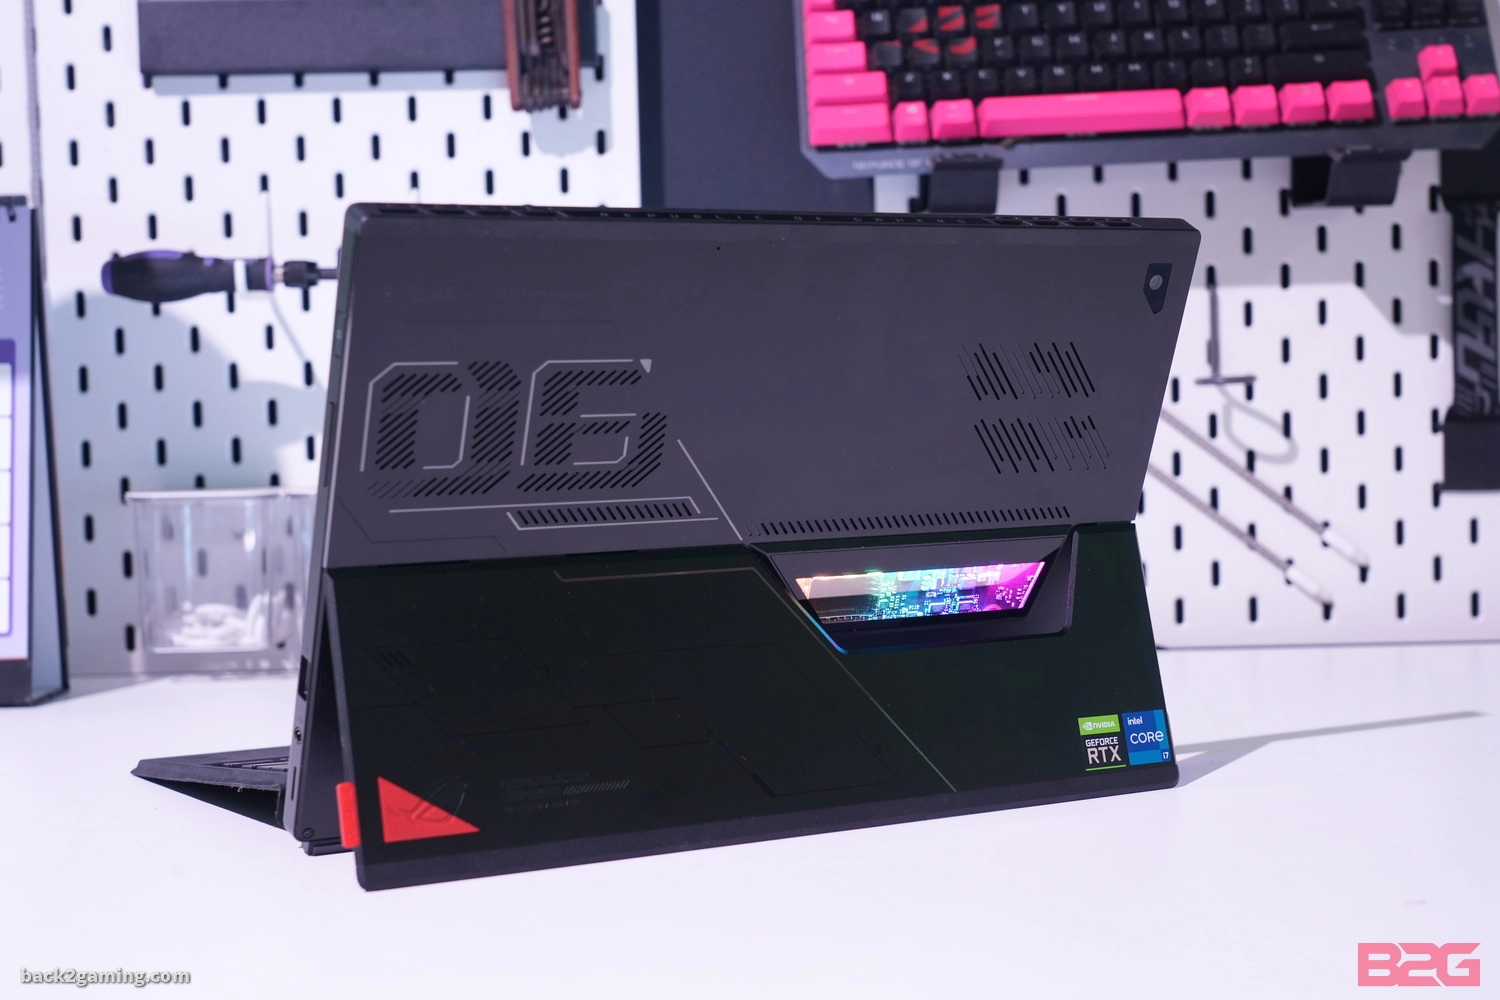 Rog Flow Z13 (I7+Rtx 3050) W/ Xg Mobile (Rx 6850M Xt) Gaming Tablet Review